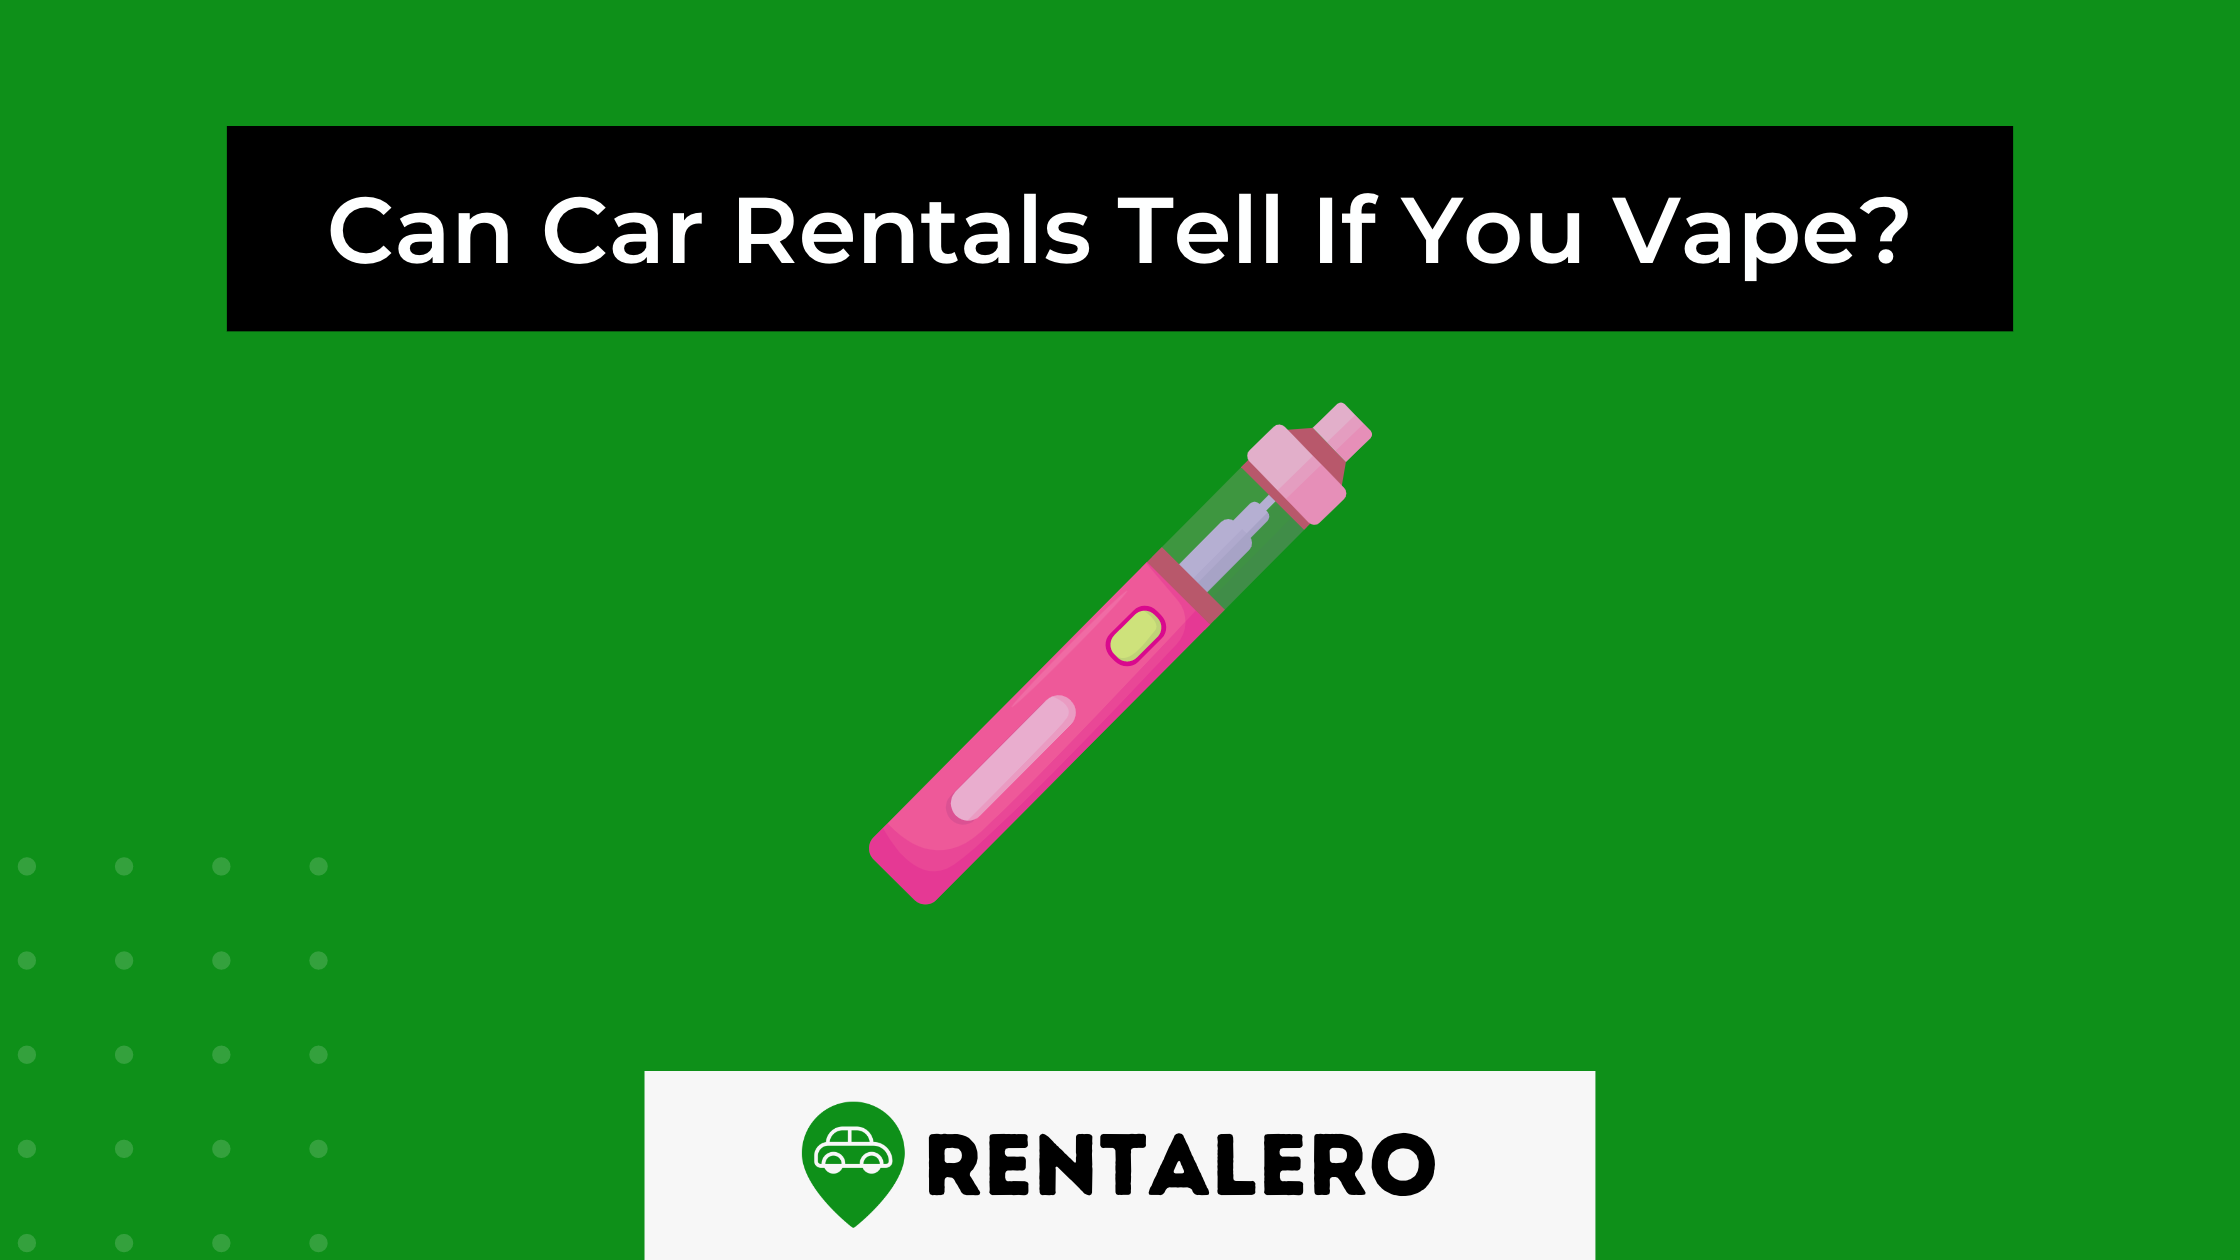 Can Car Rentals Tell If You Vape?